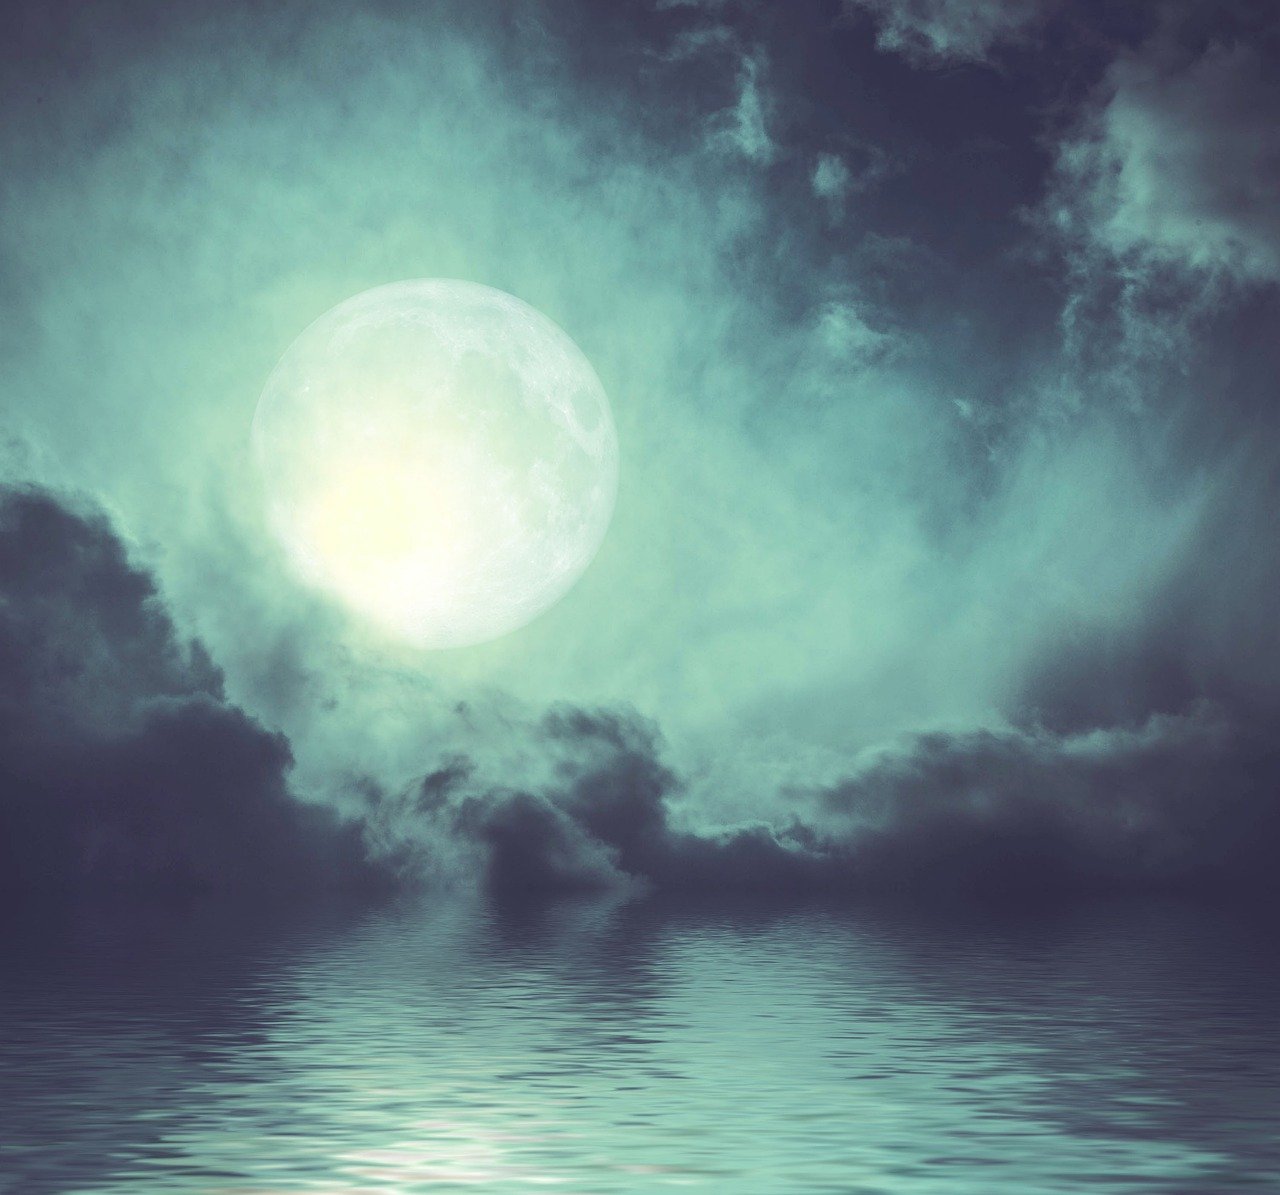 a full moon in a cloudy sky over a body of water, digital art, shutterstock, ominous beautiful mood, stock photo, teal sky, moonlit night dreamy atmosphere